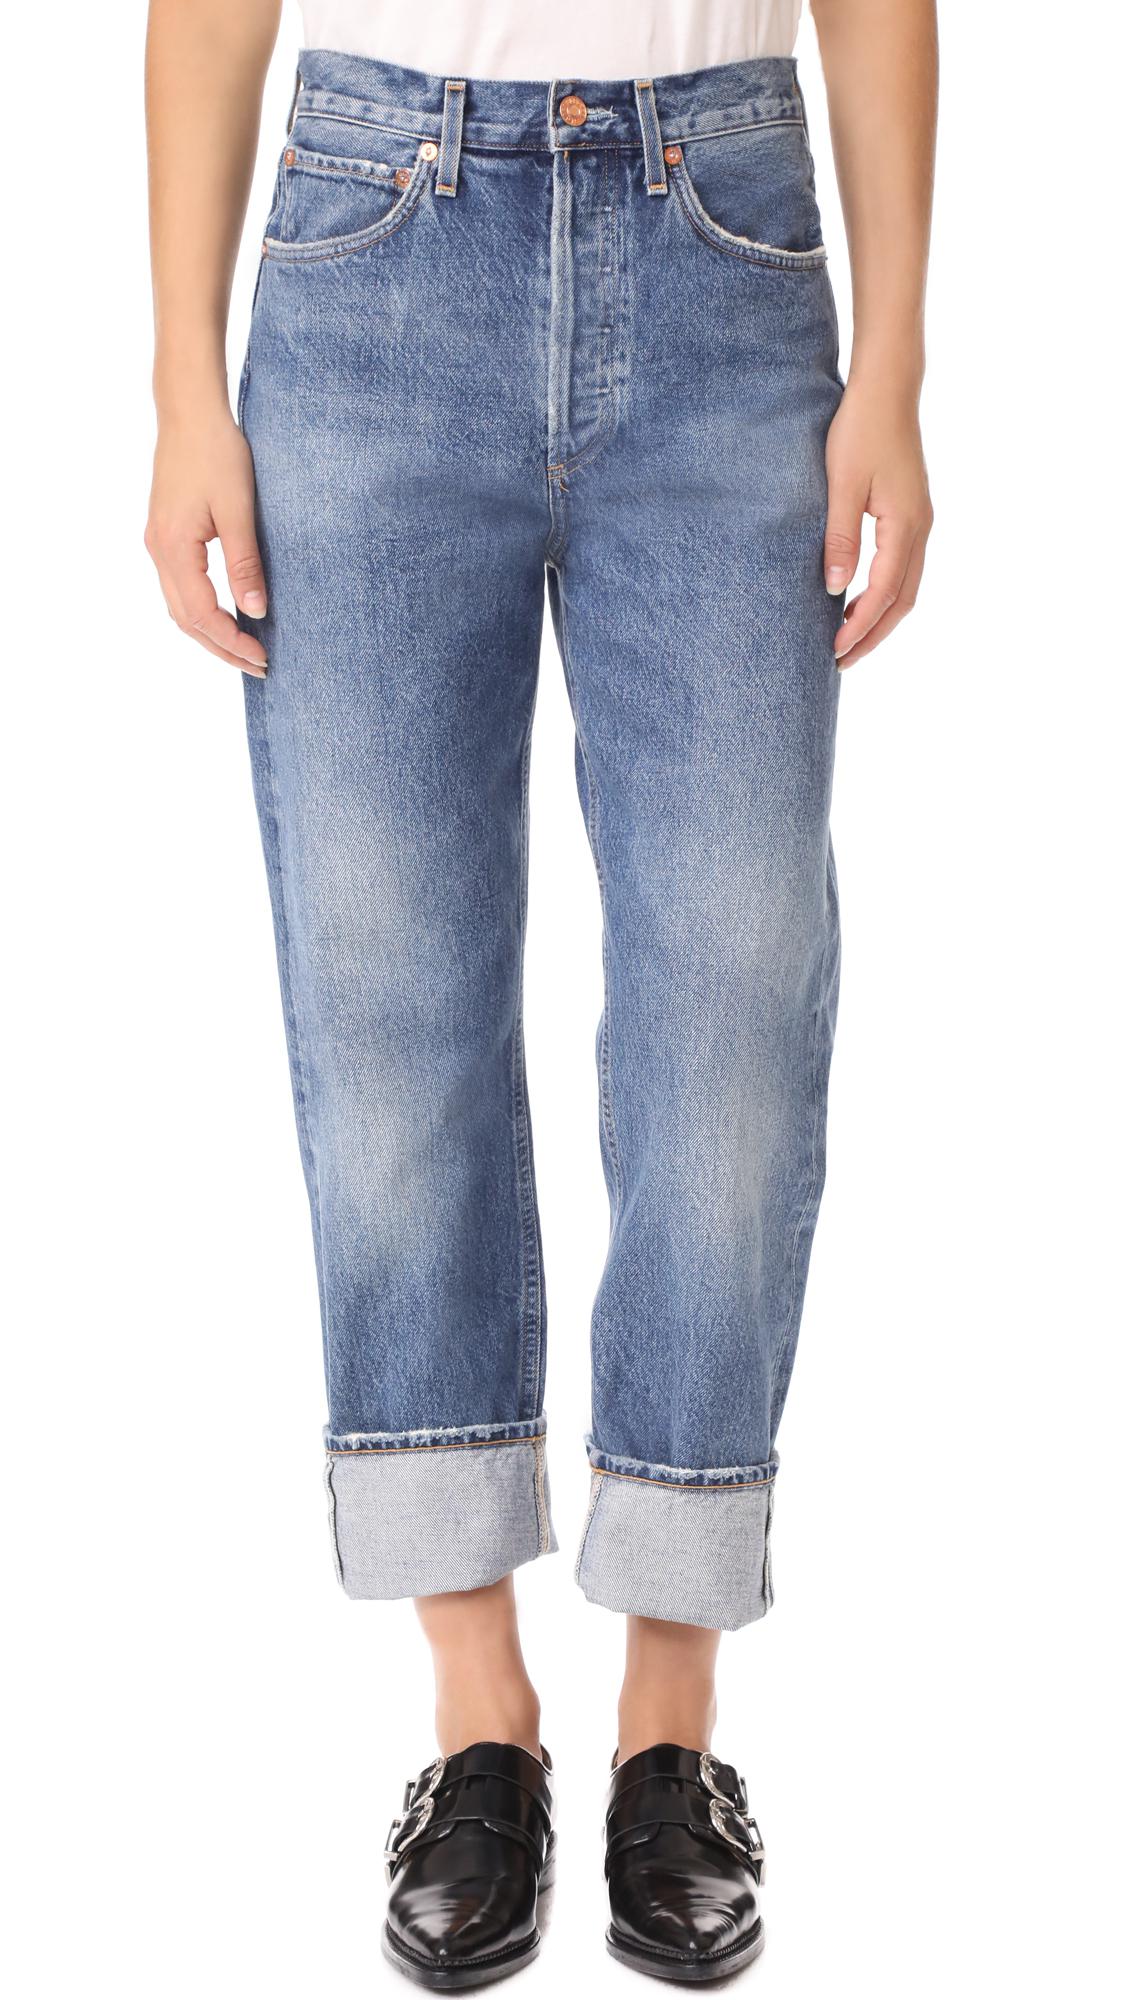 Lyst - Agolde The '90s Jeans in Blue